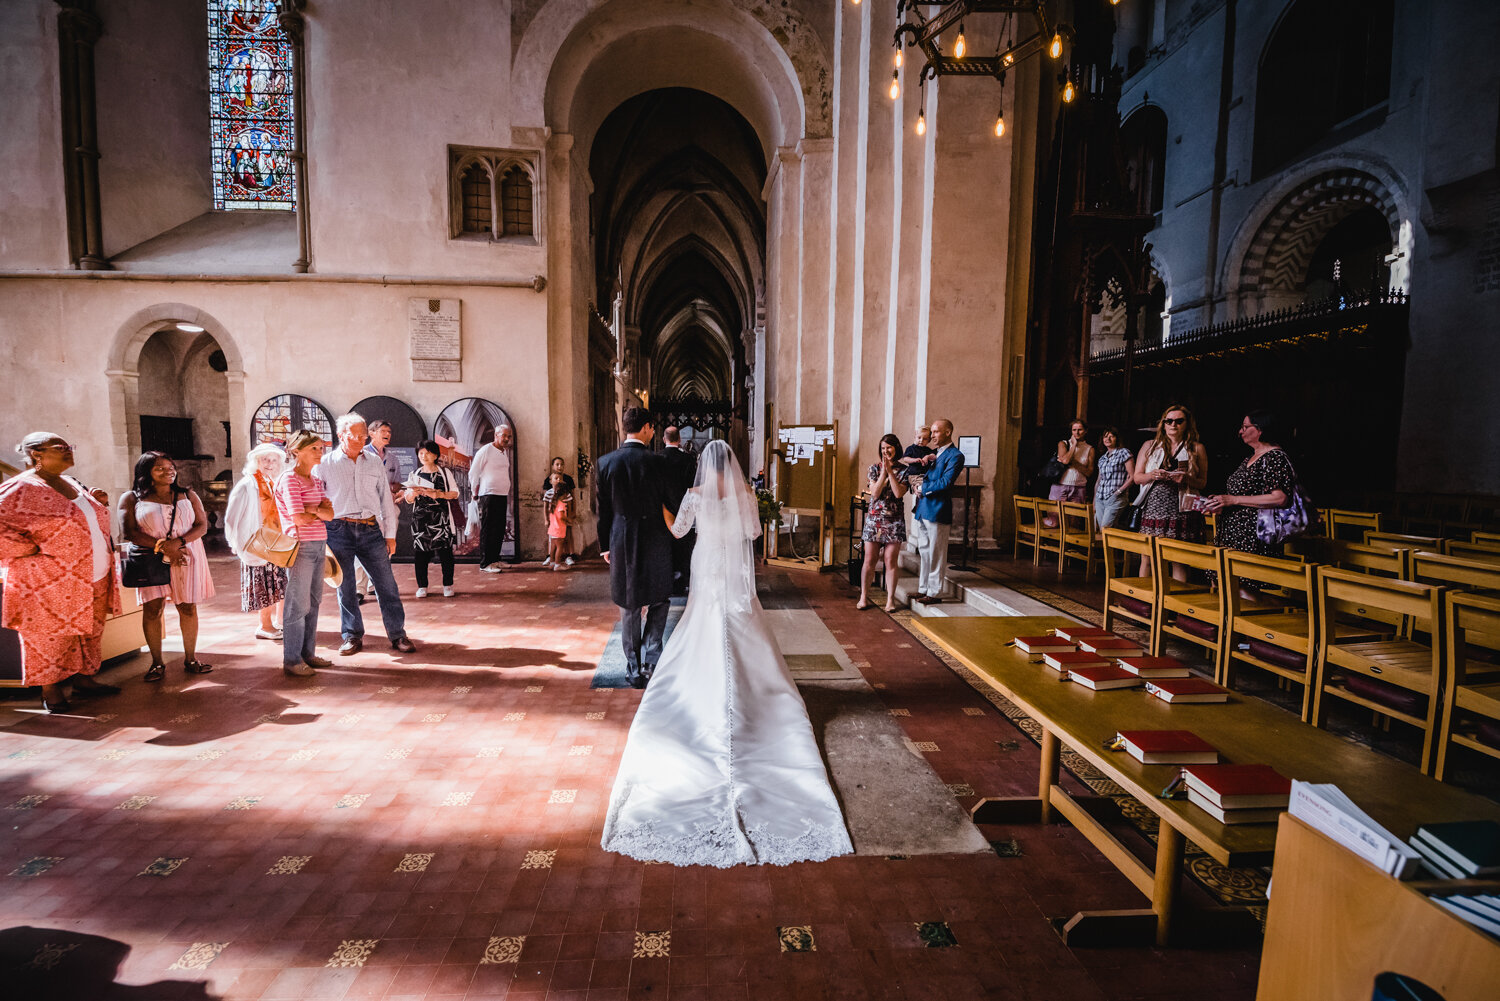 st-albans-cathedral-abbey-wedding-photos-pike-photography-233 - Copy.jpg